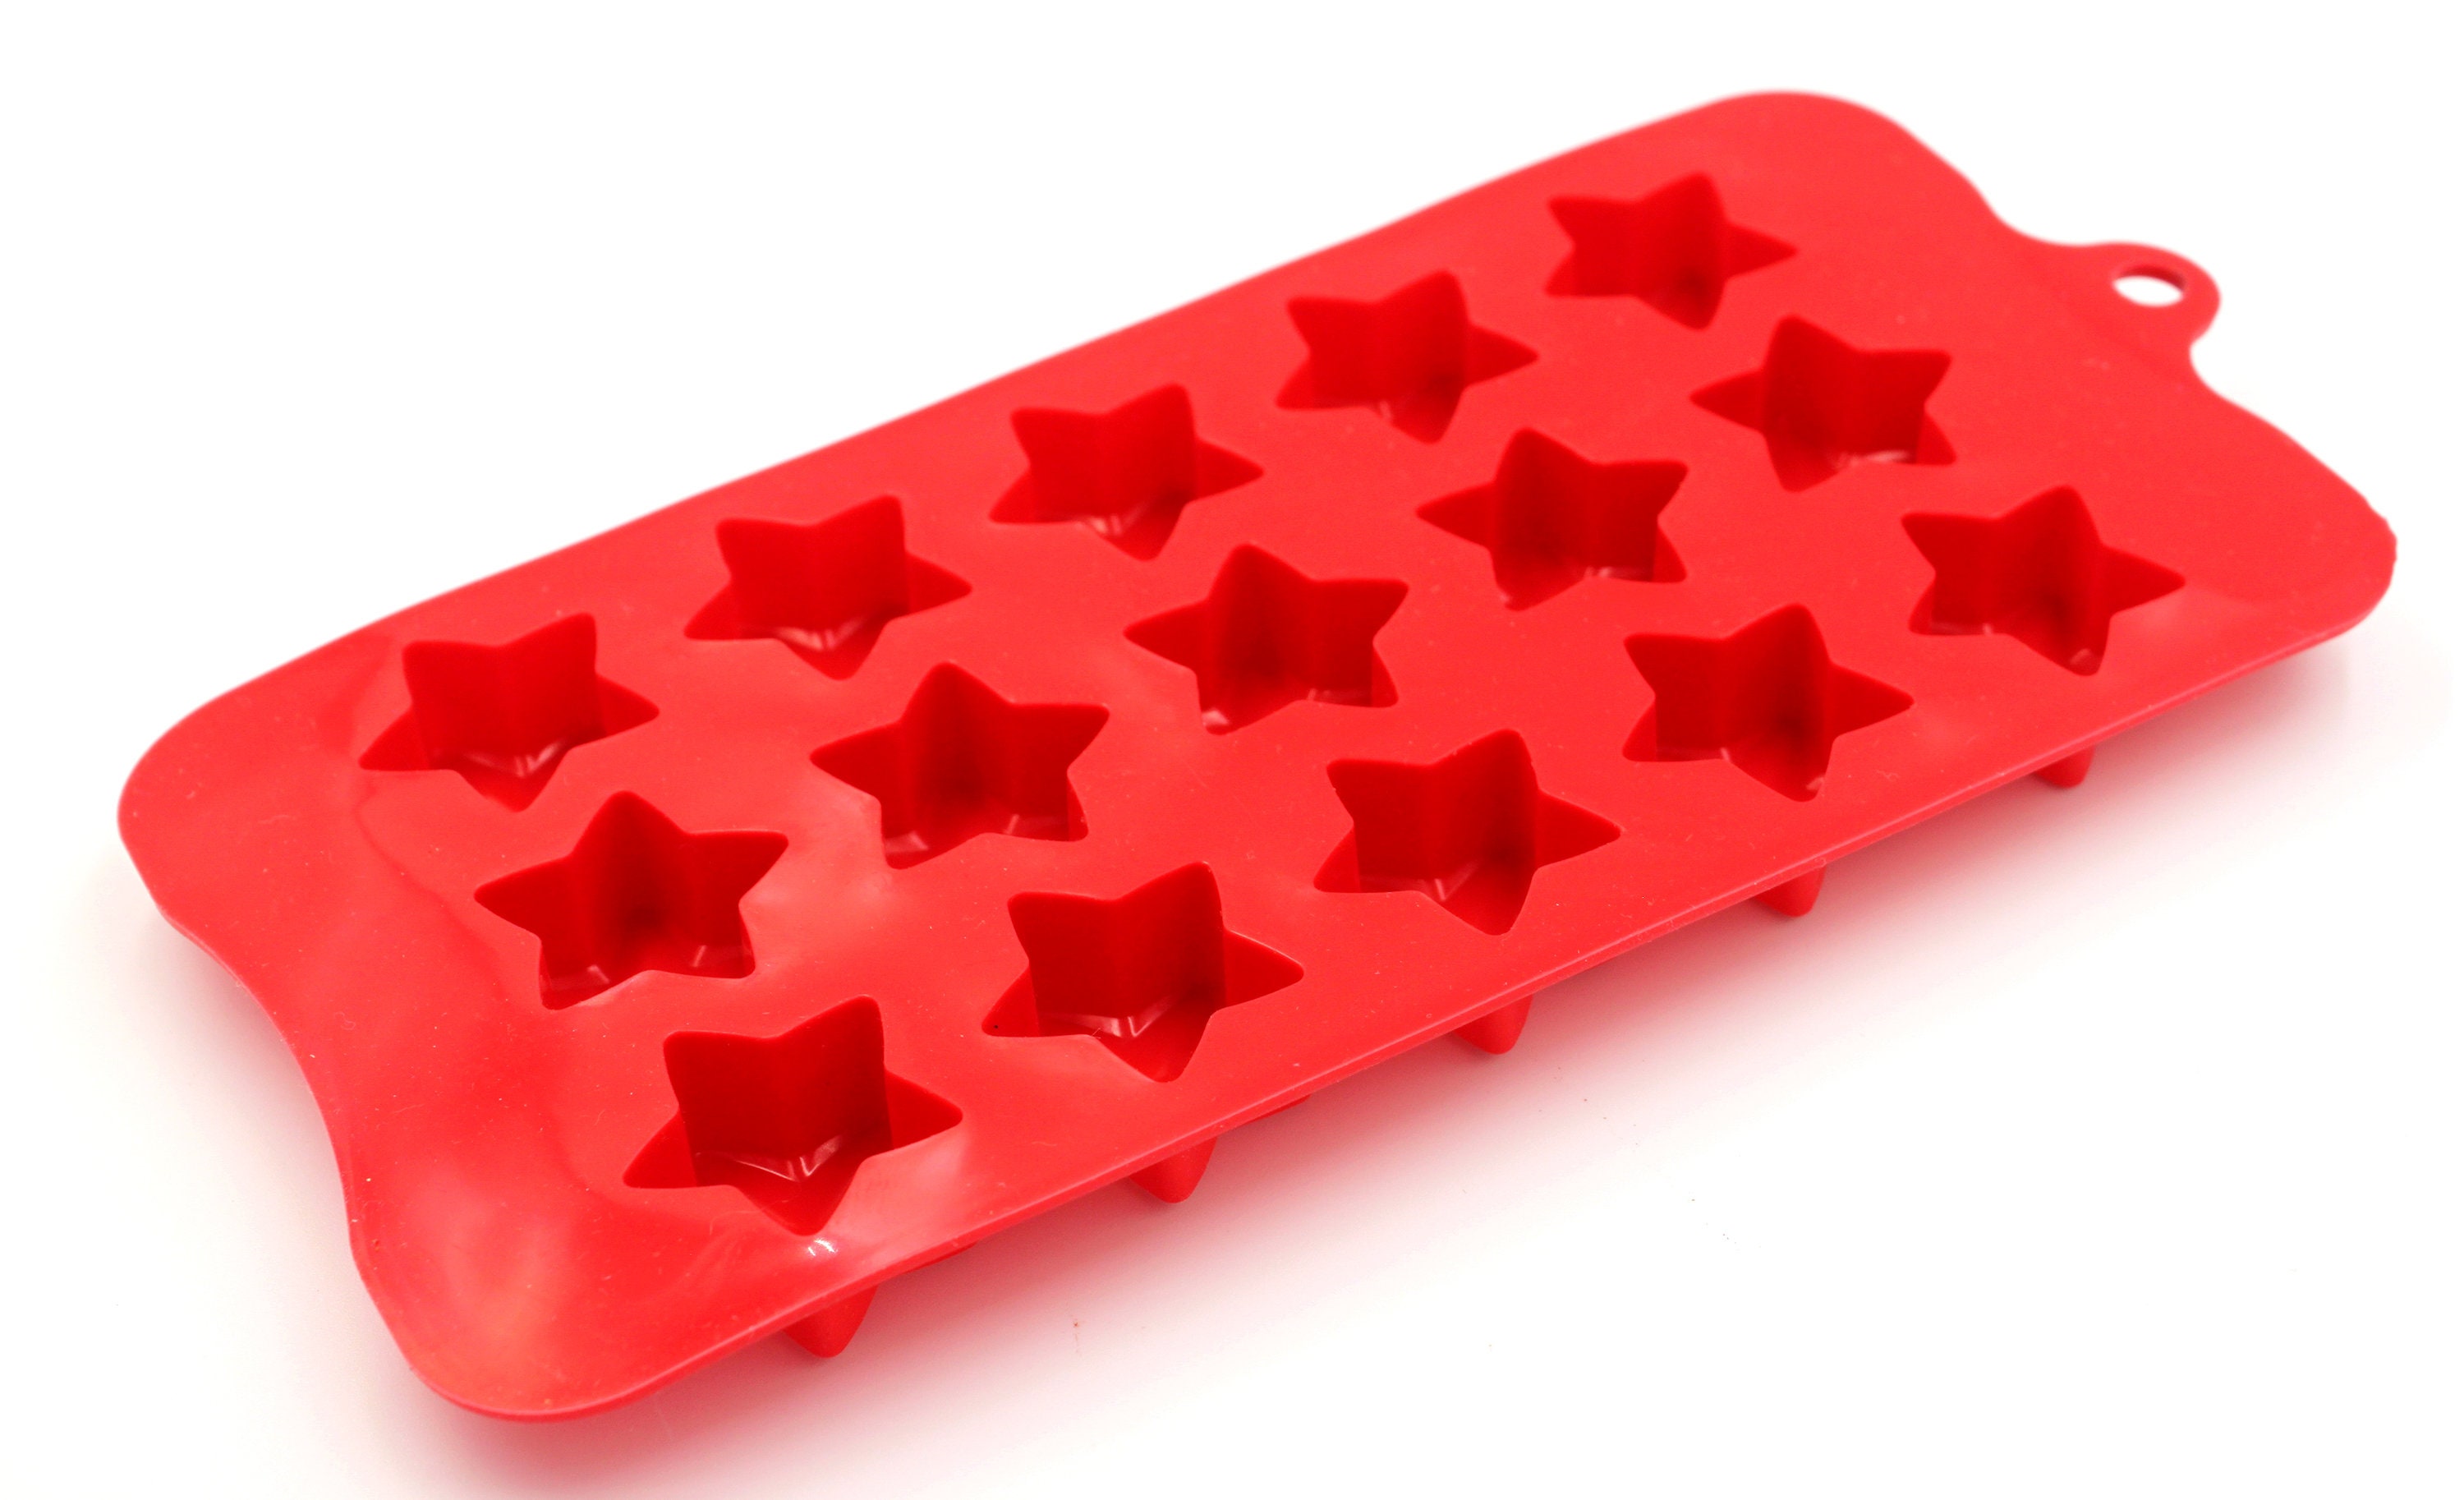 Chef Craft Flexible Thermoplastic 10-Cube Ice Cube Tray - Star